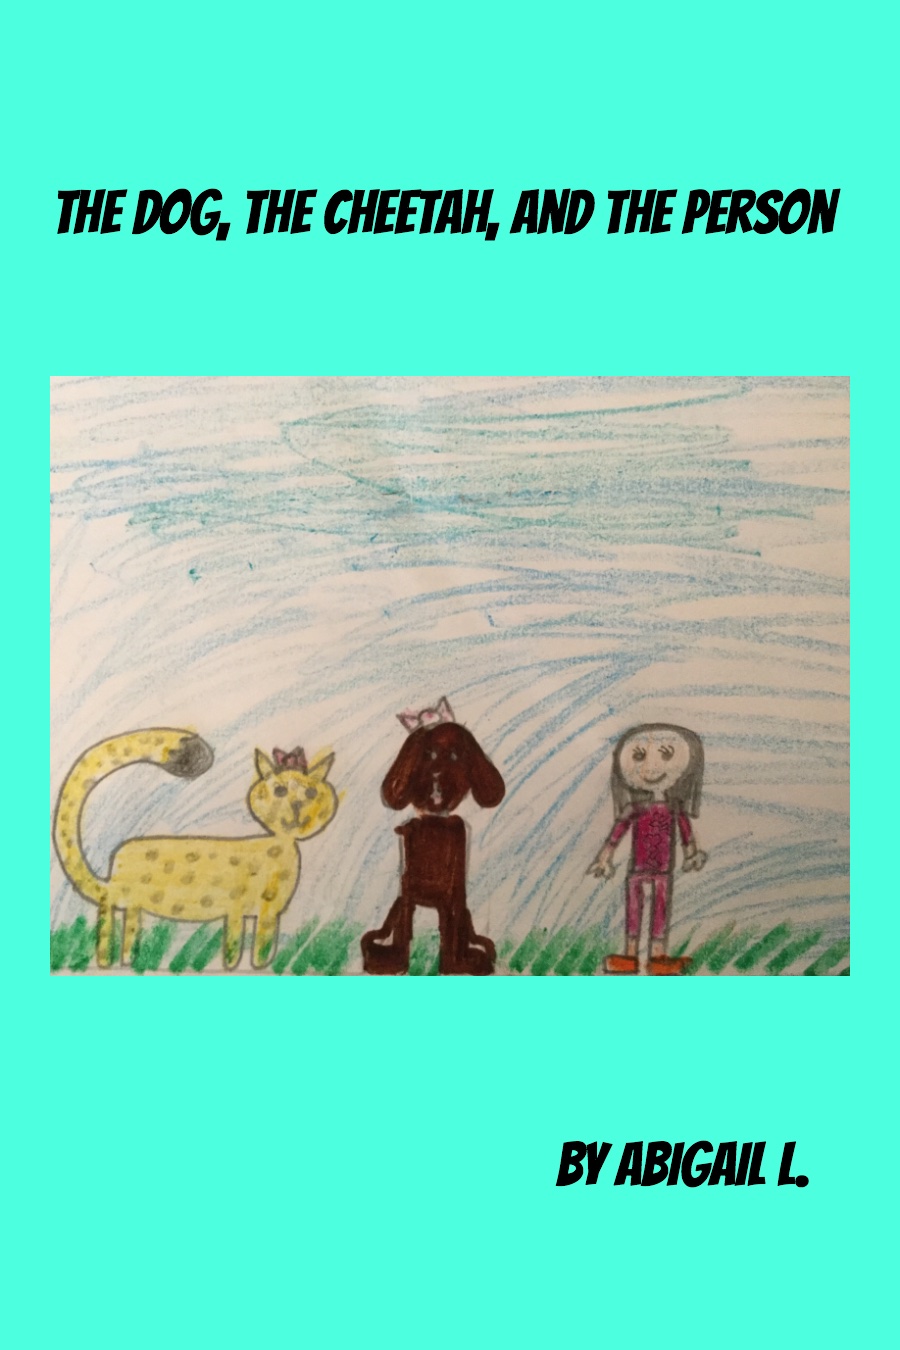 The Dog the Cheetah and the Person by Abigail L